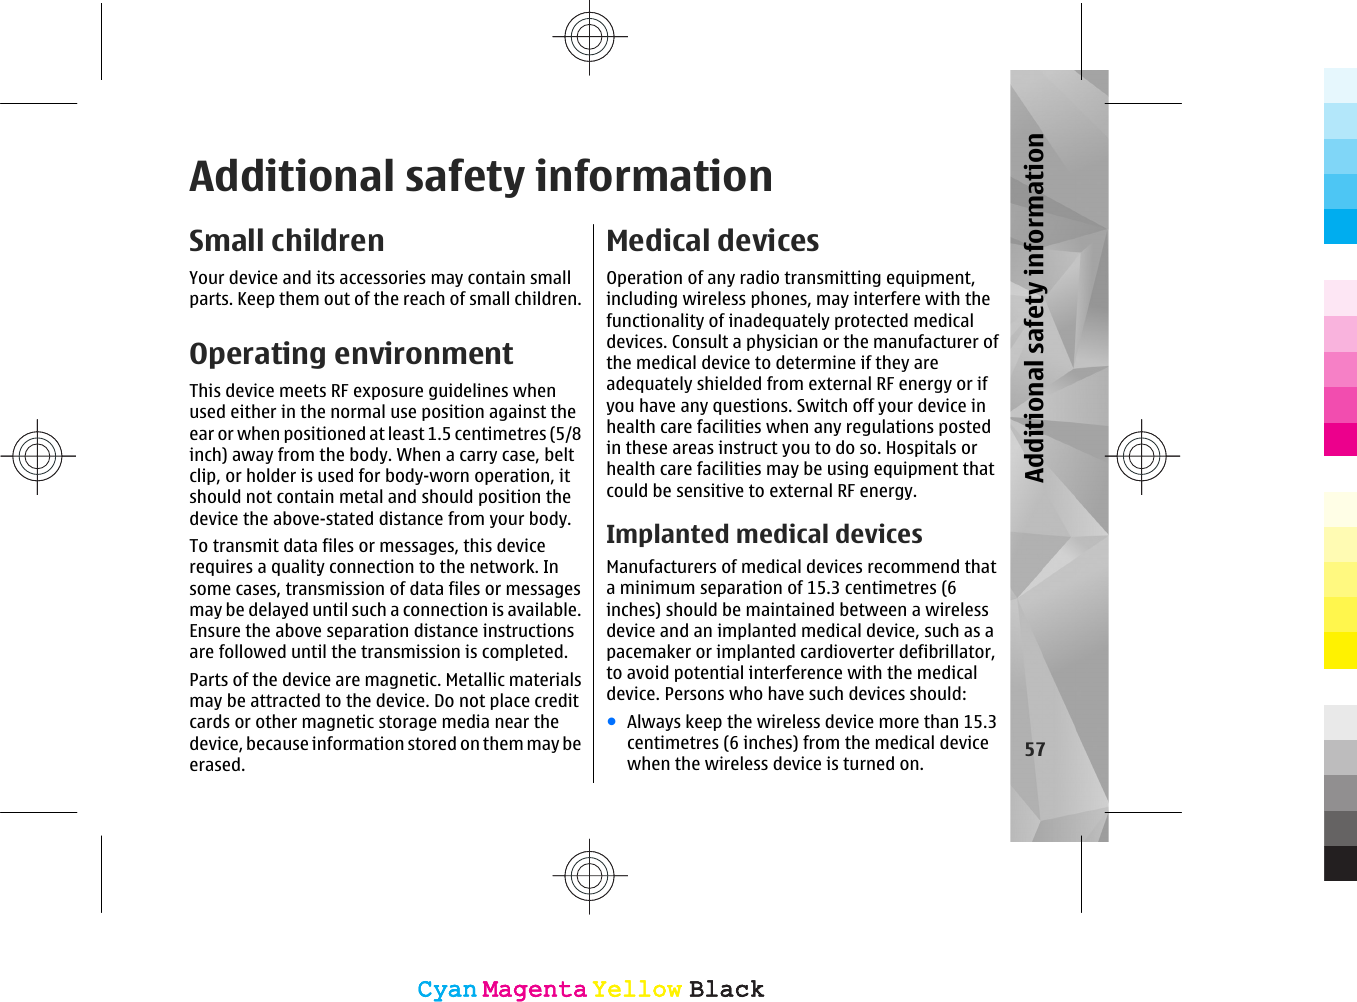 Additional safety informationSmall childrenYour device and its accessories may contain smallparts. Keep them out of the reach of small children.Operating environmentThis device meets RF exposure guidelines whenused either in the normal use position against theear or when positioned at least 1.5 centimetres (5/8inch) away from the body. When a carry case, beltclip, or holder is used for body-worn operation, itshould not contain metal and should position thedevice the above-stated distance from your body.To transmit data files or messages, this devicerequires a quality connection to the network. Insome cases, transmission of data files or messagesmay be delayed until such a connection is available.Ensure the above separation distance instructionsare followed until the transmission is completed.Parts of the device are magnetic. Metallic materialsmay be attracted to the device. Do not place creditcards or other magnetic storage media near thedevice, because information stored on them may beerased.Medical devicesOperation of any radio transmitting equipment,including wireless phones, may interfere with thefunctionality of inadequately protected medicaldevices. Consult a physician or the manufacturer ofthe medical device to determine if they areadequately shielded from external RF energy or ifyou have any questions. Switch off your device inhealth care facilities when any regulations postedin these areas instruct you to do so. Hospitals orhealth care facilities may be using equipment thatcould be sensitive to external RF energy.Implanted medical devicesManufacturers of medical devices recommend thata minimum separation of 15.3 centimetres (6inches) should be maintained between a wirelessdevice and an implanted medical device, such as apacemaker or implanted cardioverter defibrillator,to avoid potential interference with the medicaldevice. Persons who have such devices should:●Always keep the wireless device more than 15.3centimetres (6 inches) from the medical devicewhen the wireless device is turned on. 57Additional safety informationCyanCyanMagentaMagentaYellowYellowBlackBlackCyanCyanMagentaMagentaYellowYellowBlackBlack